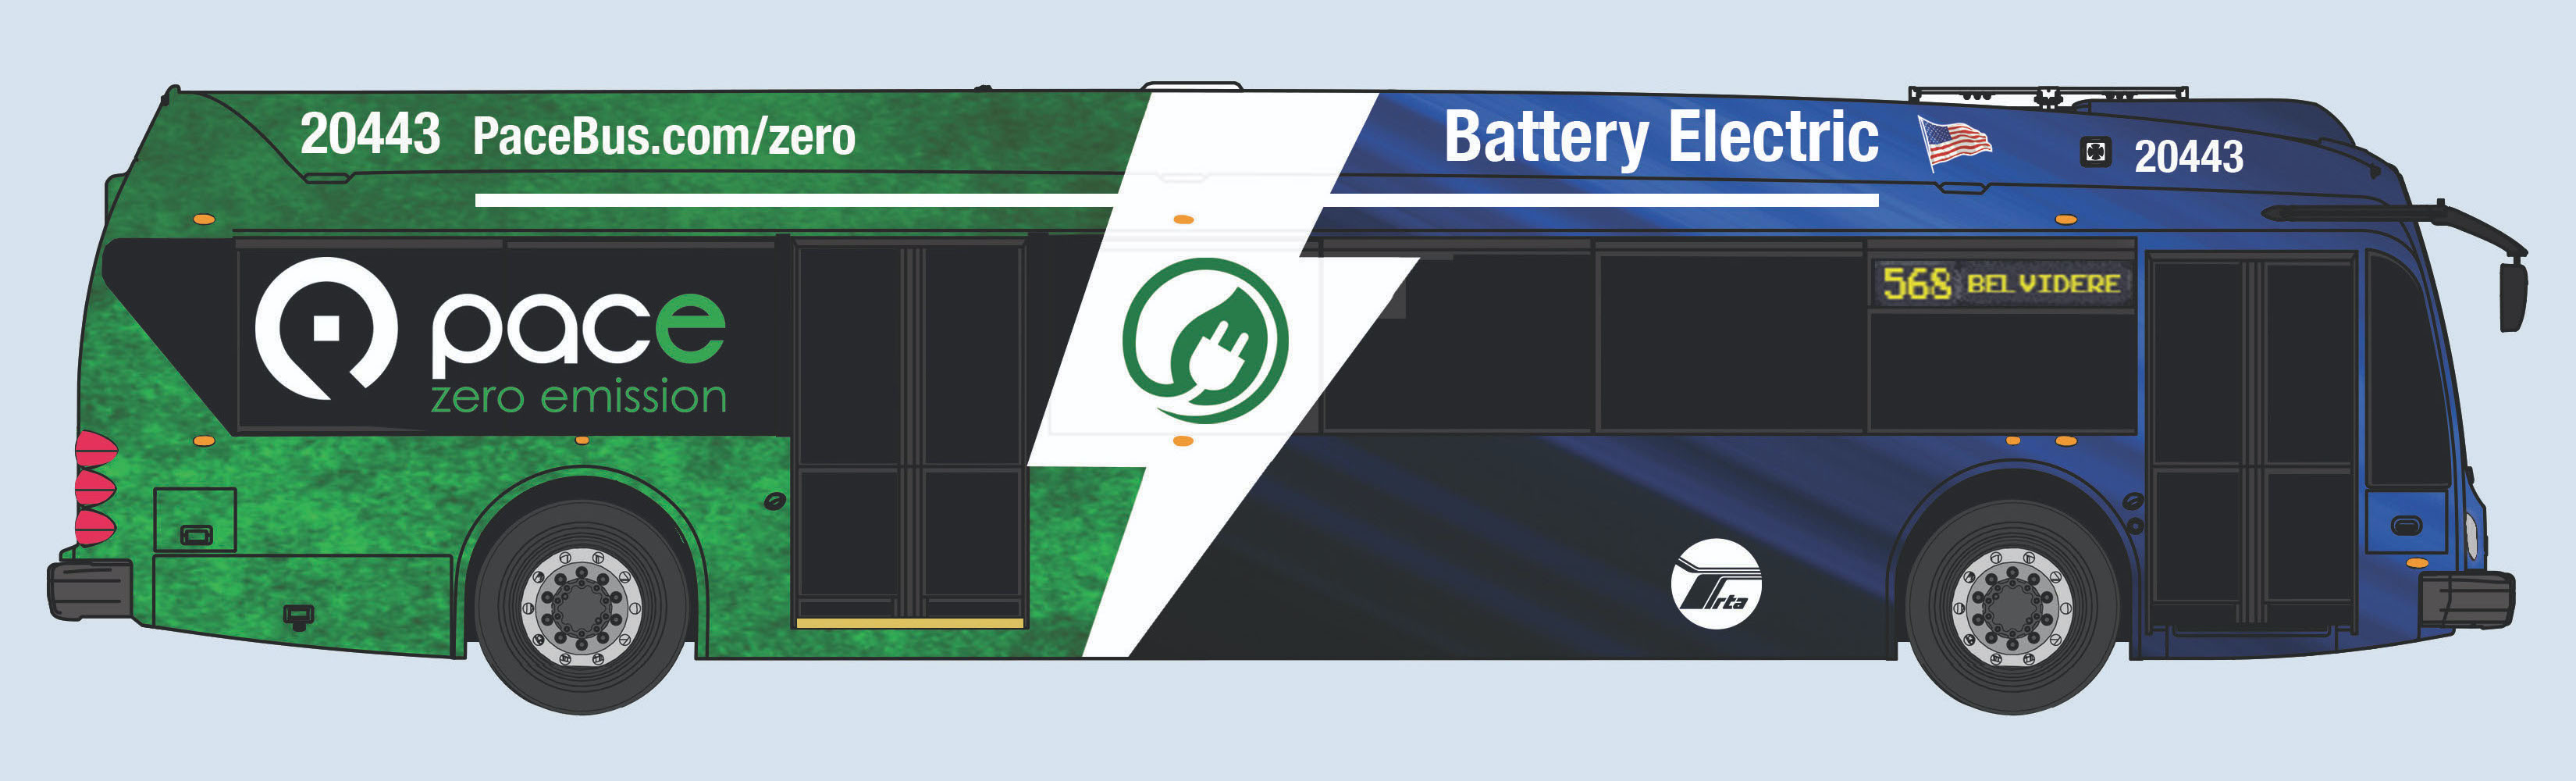 Image showing a new Pace Electric Bus design with Battery Electric sign on the bus